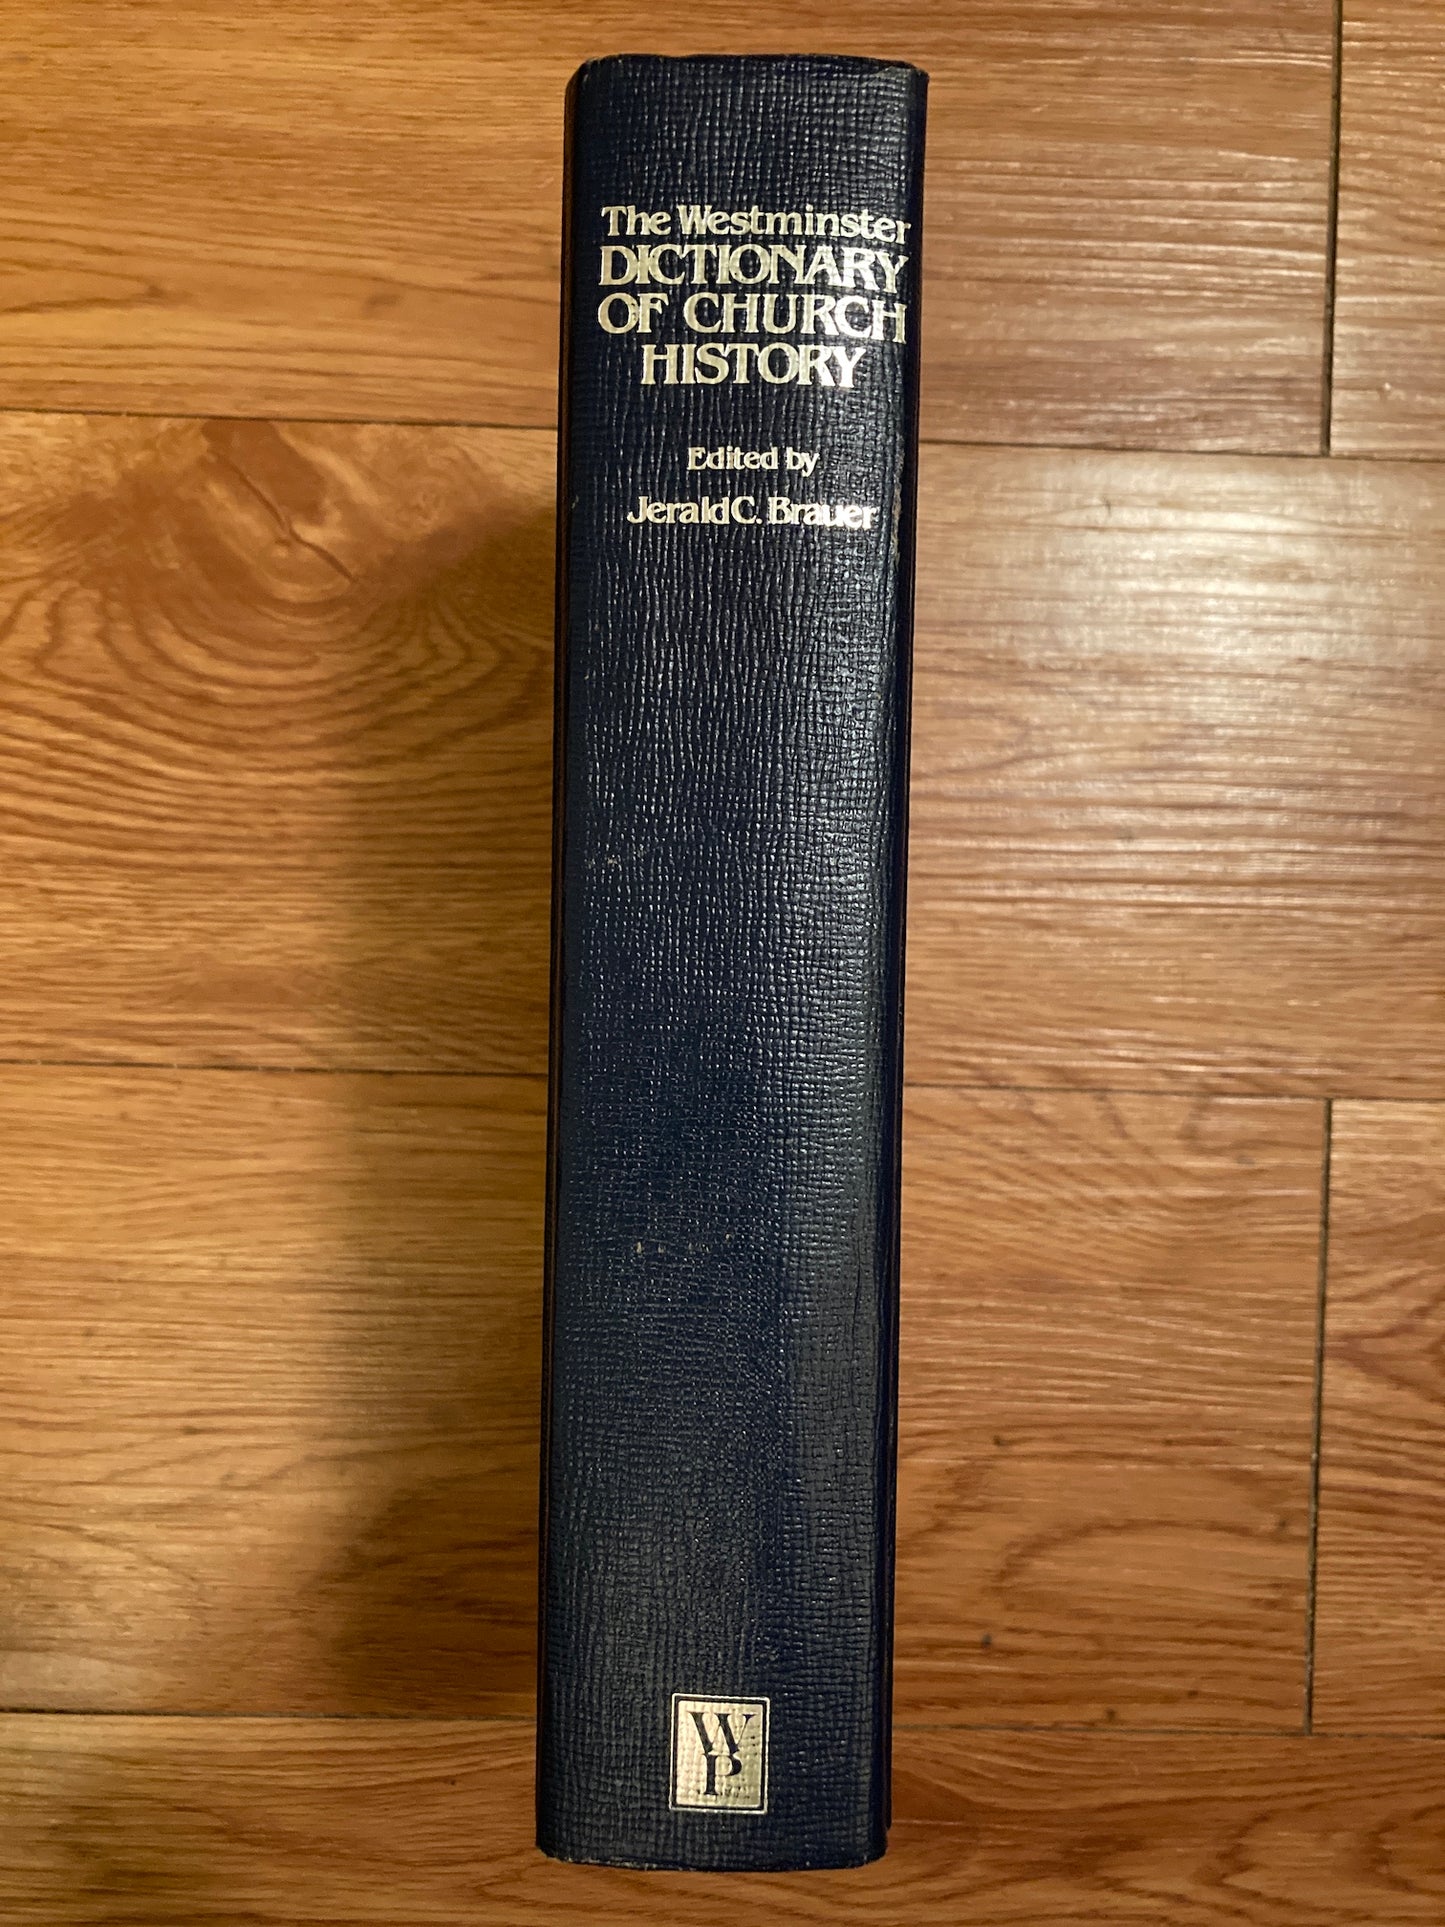 The Westminster Dictionary of Church History by Jerald C. Brauer